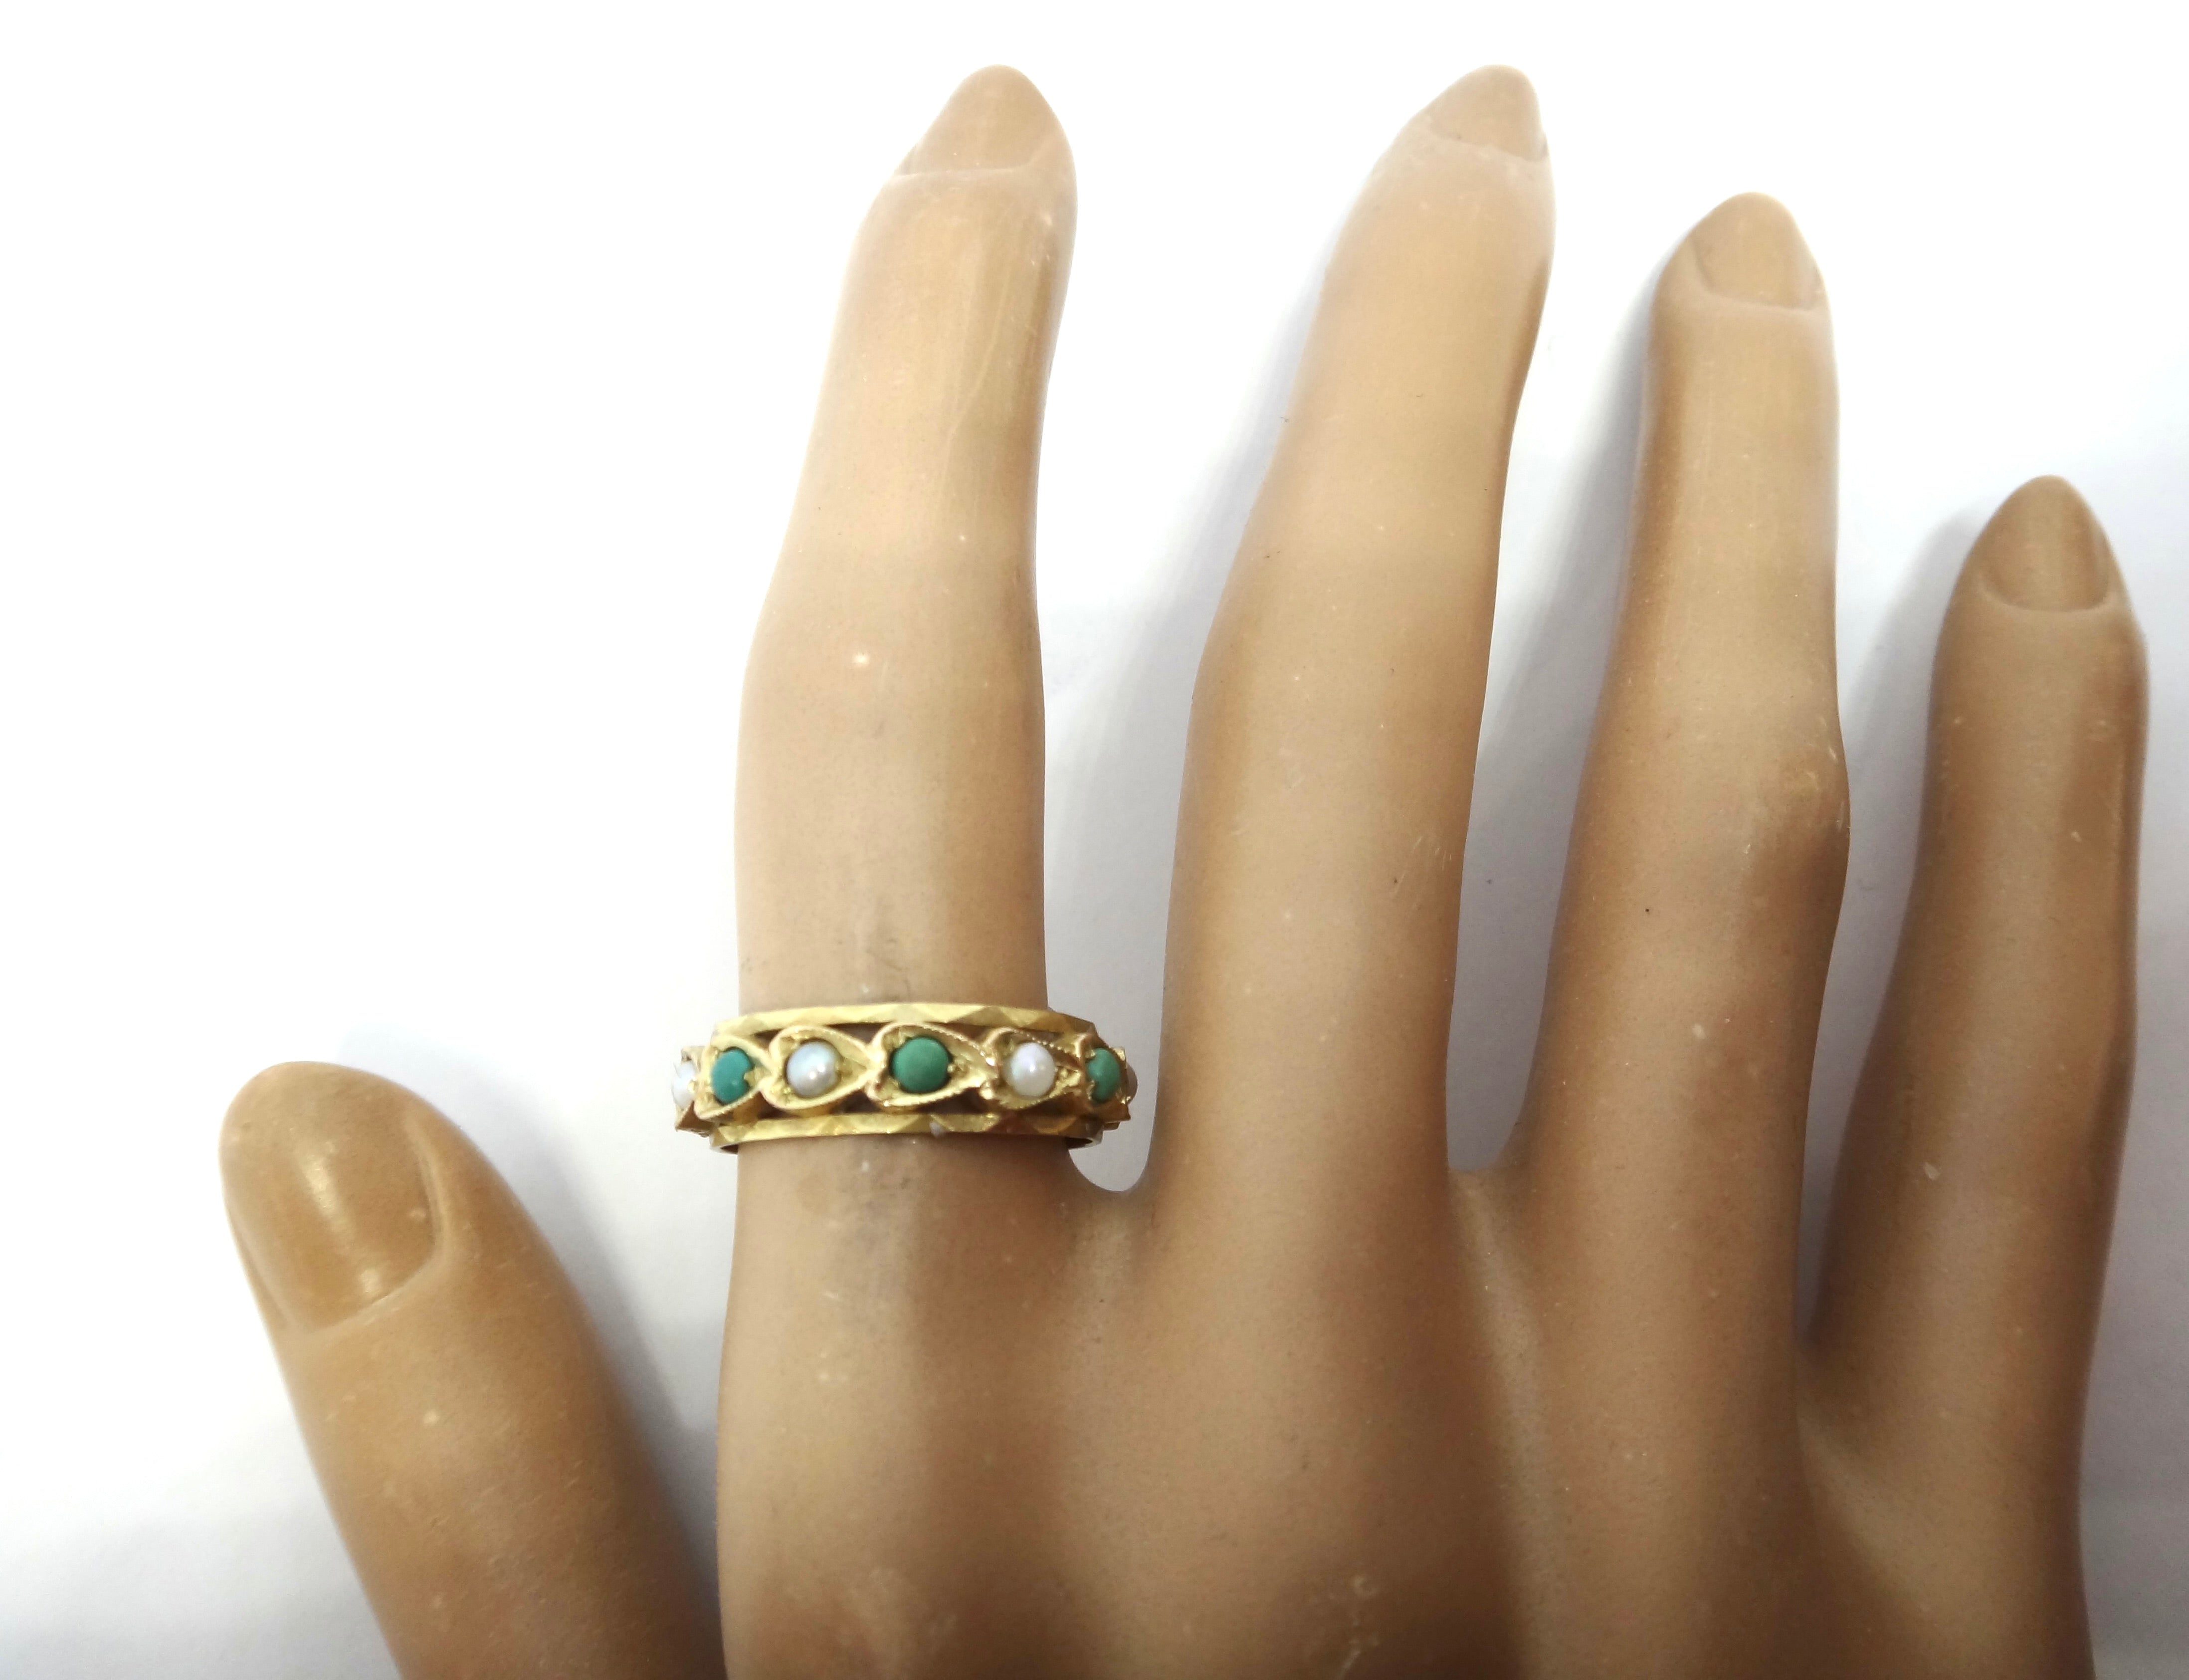 ANTIQUE Style 9ct Yellow Gold, Turquoise & Pearl Eternity Ring c.1970